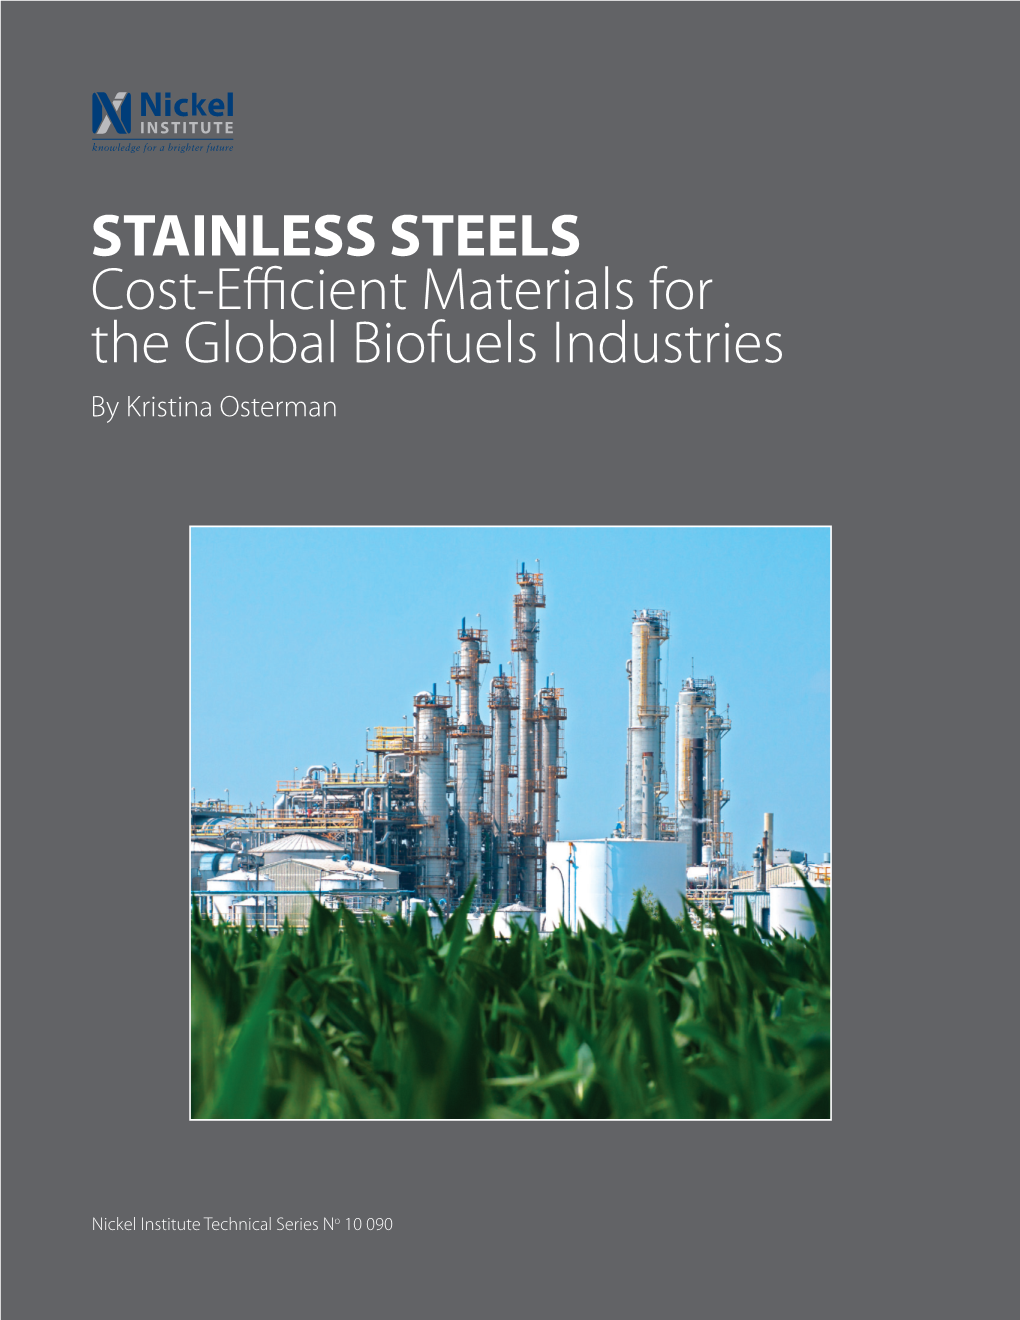 STAINLESS STEELS Cost-Efficient Materials for the Global Biofuels Industries by Kristina Osterman